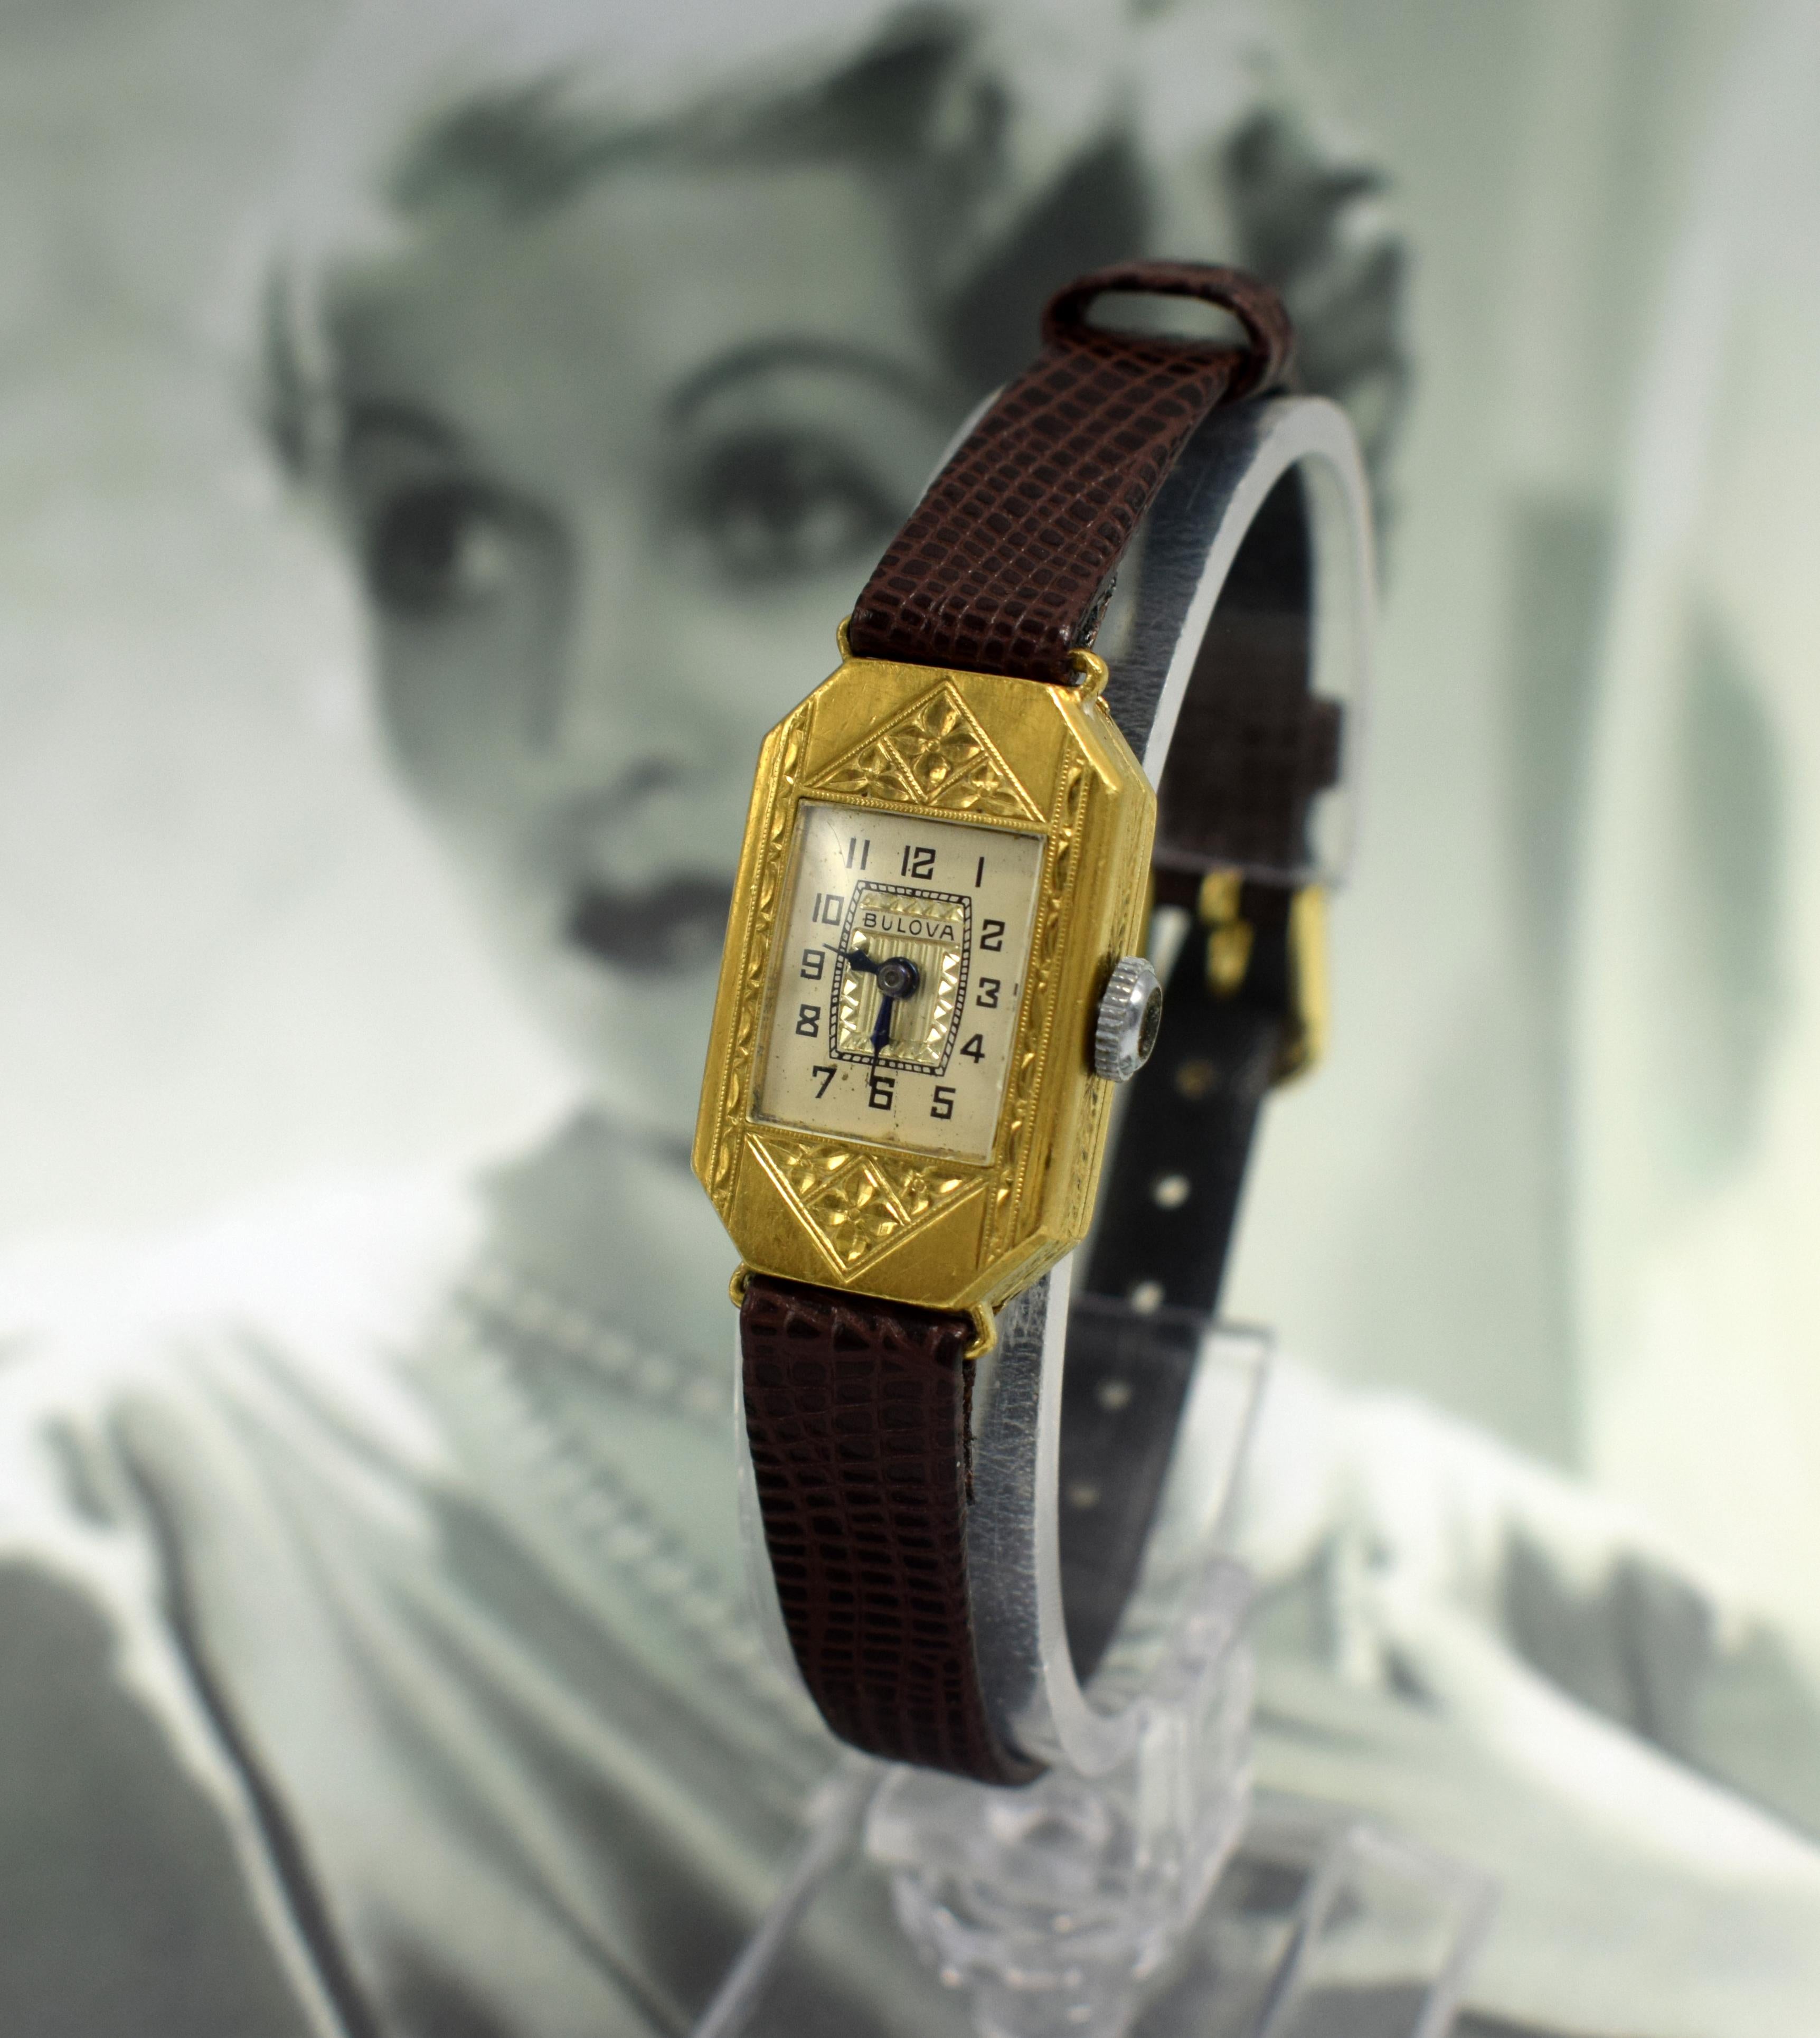 Very attractive and totally authentic 1929 Bulova Art Deco ladies watch that has a 15 jewel movement that is in excellent clean working condition. Dated to 1929 this is one of the best examples we have come across that is all original. The case is